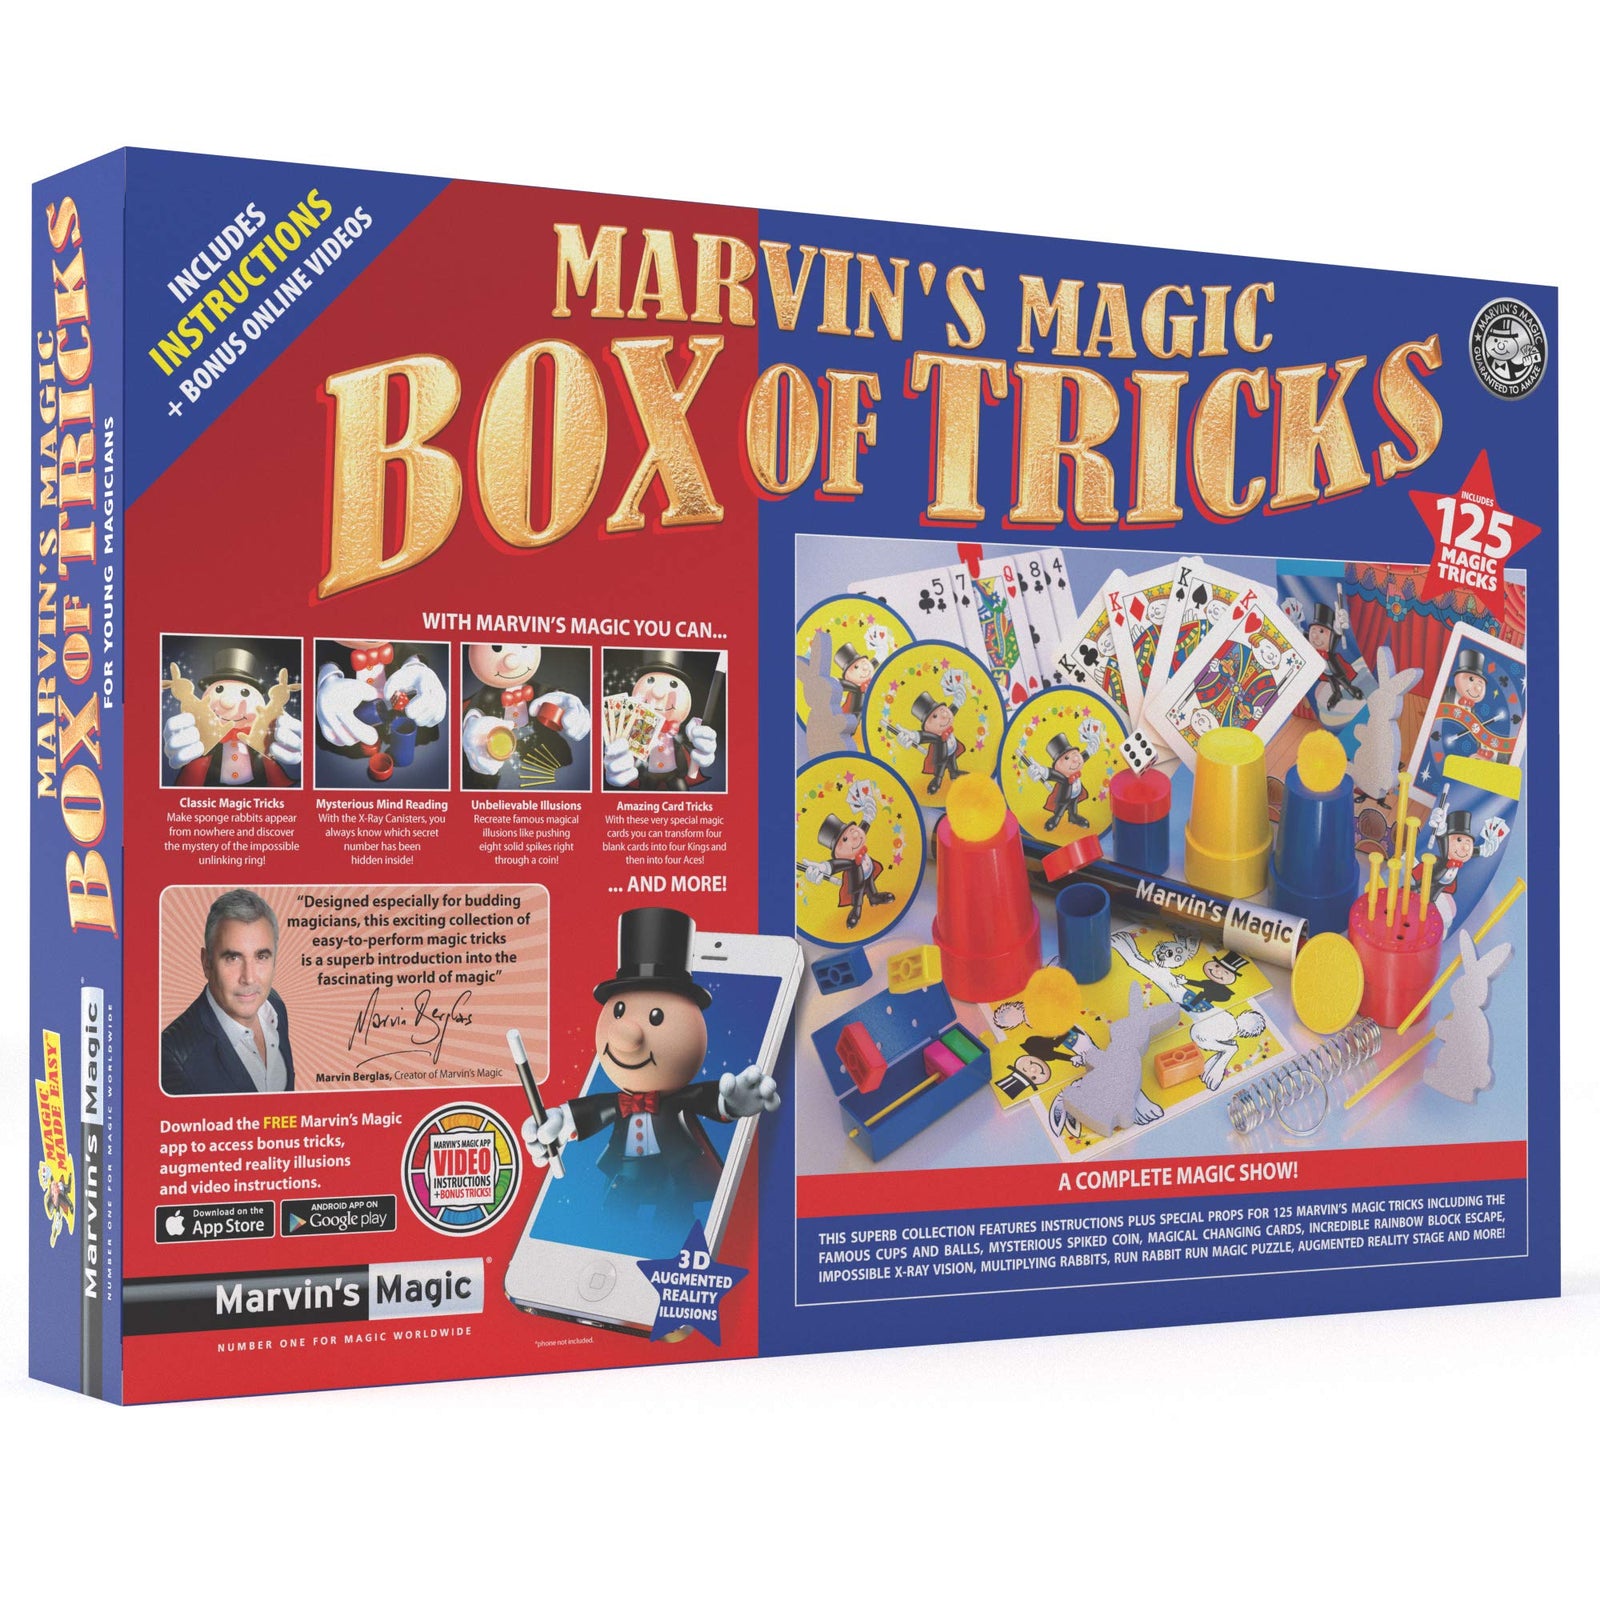 Marvin's Magic - 125 Amazing Magic Tricks for Children | Kids Magic Set | Magic Kit for Kids Including Magic Wand, Card Tricks + Much More | Suitable for Age 6+